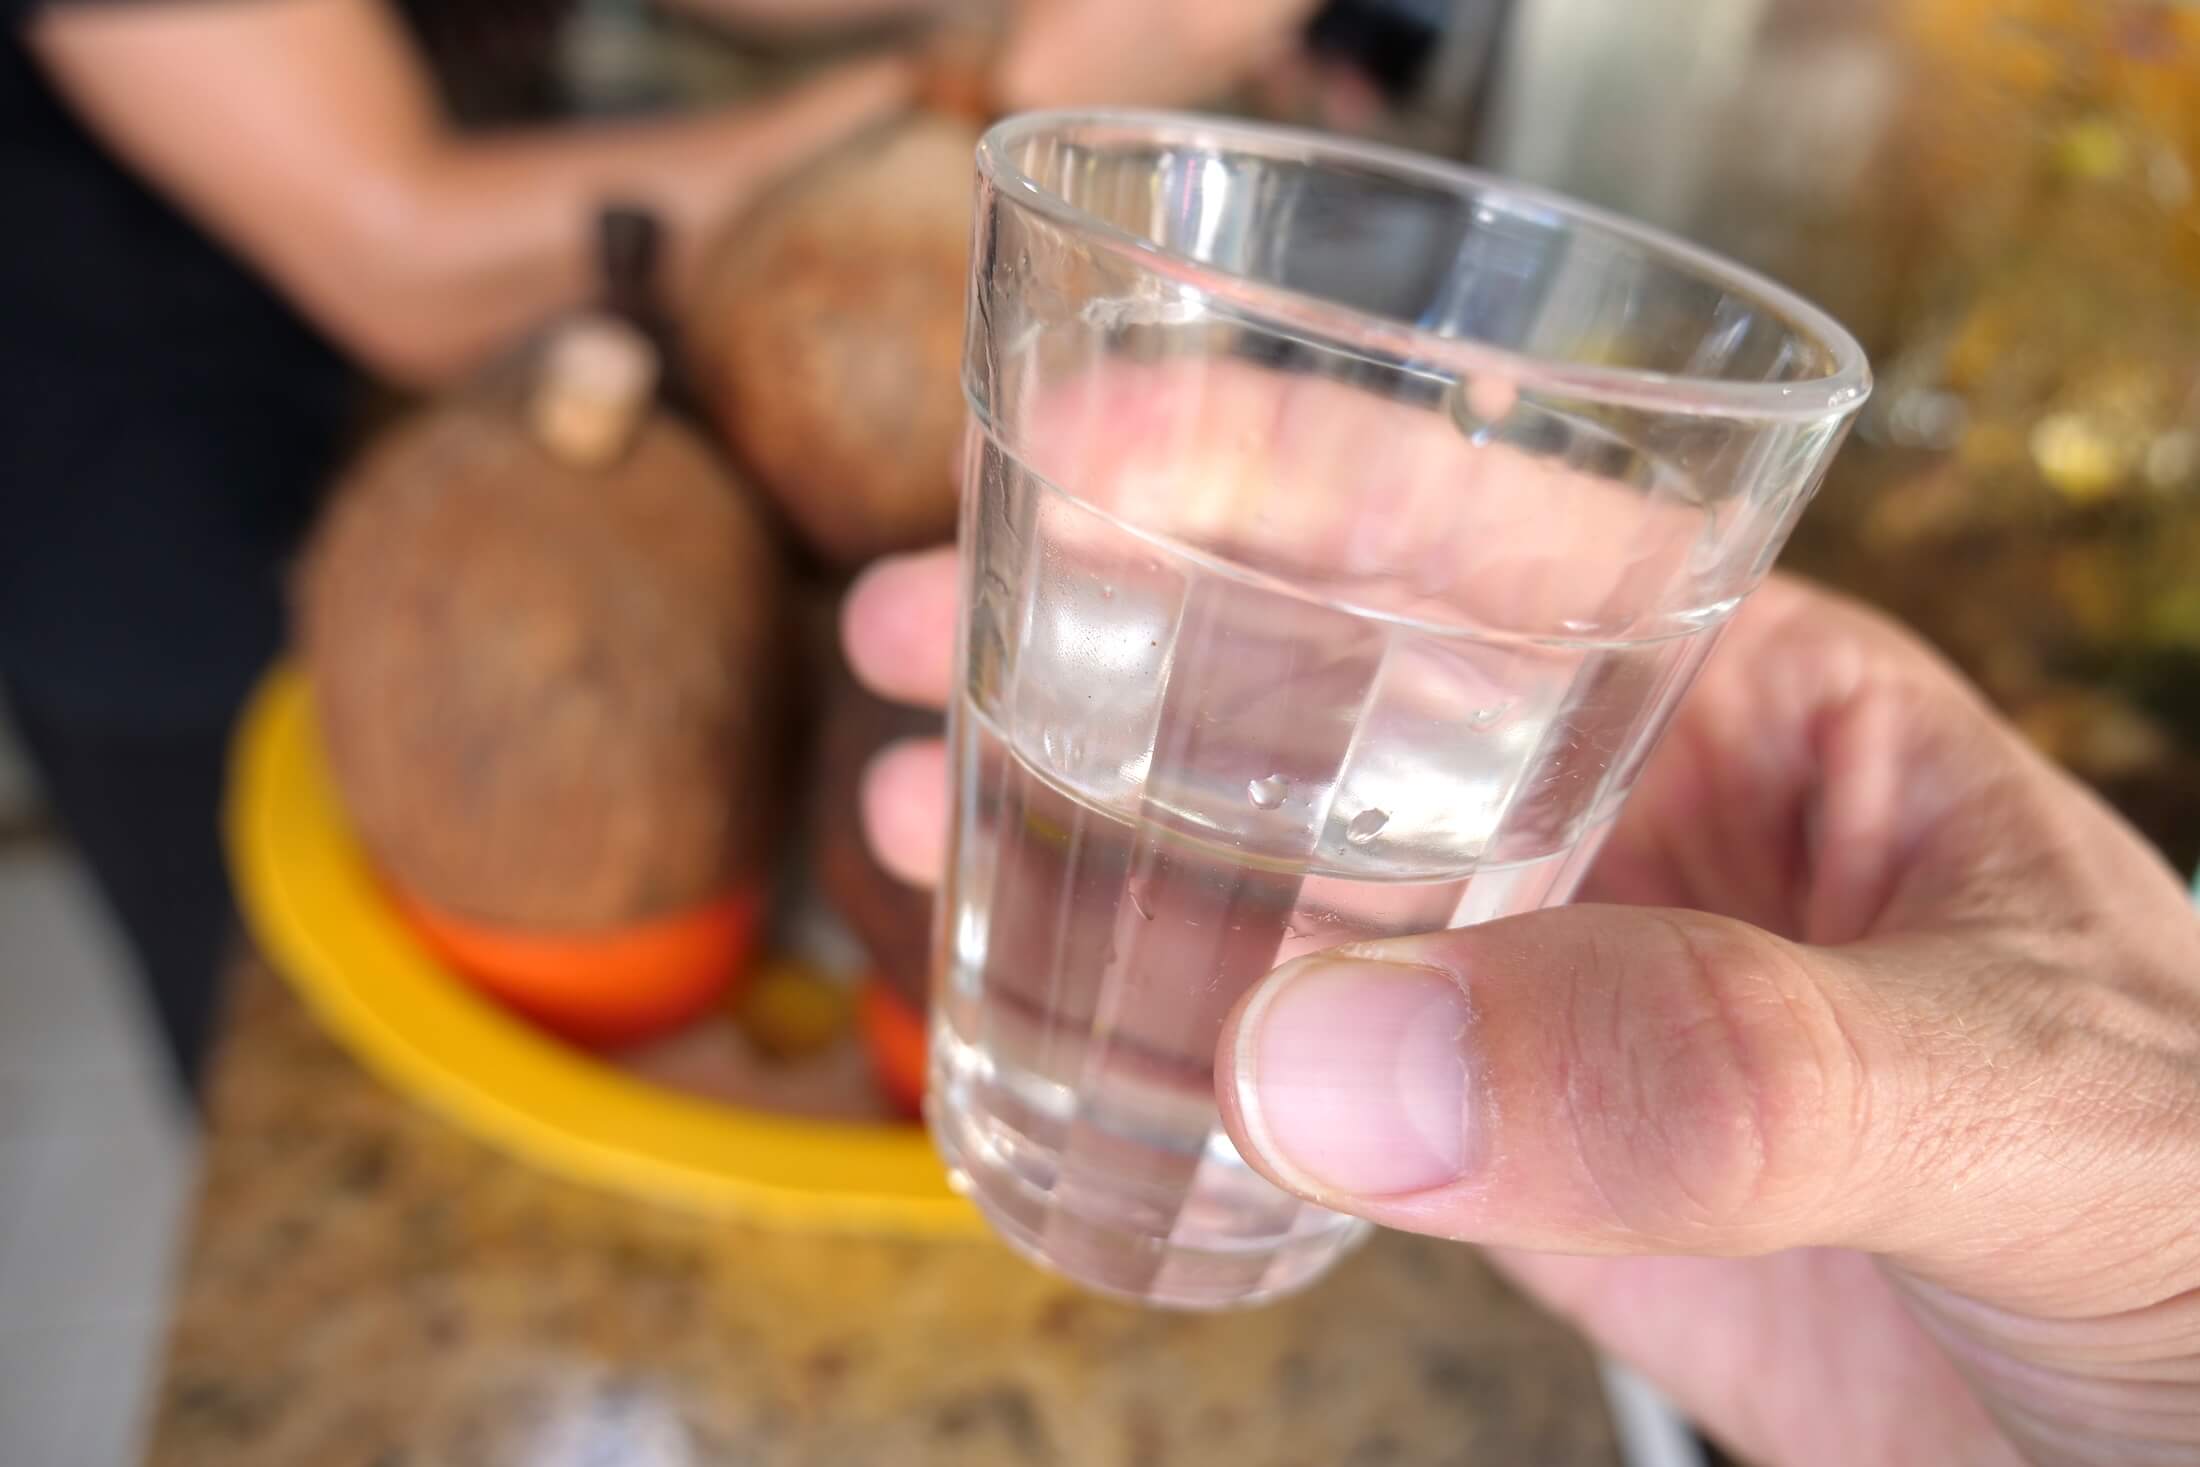 Try a small glass of their in-house coconut alcohol - serving it from the coconut shell